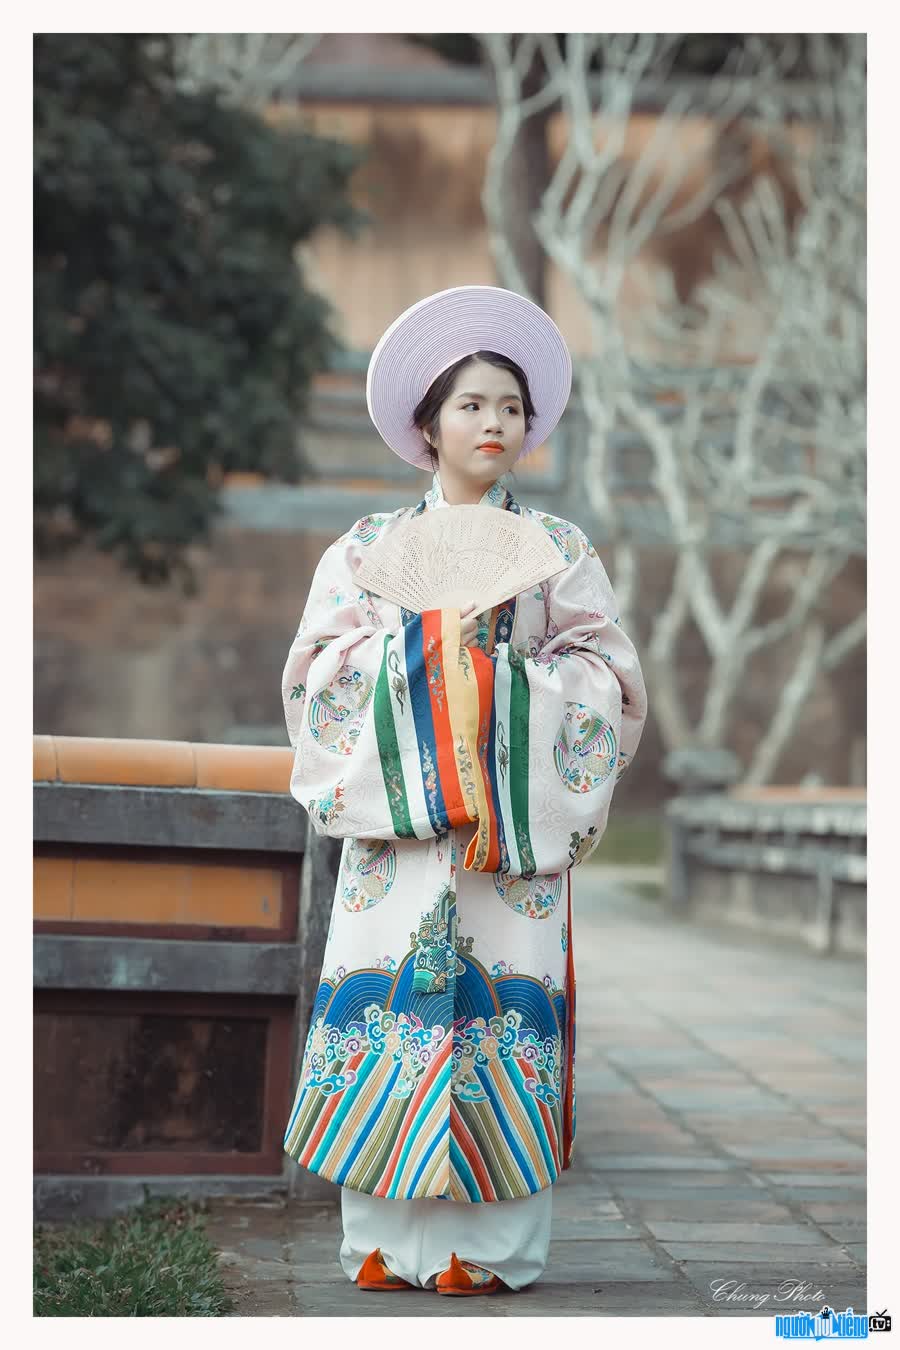 Uyen Phuong is beautiful and proud in antique clothes